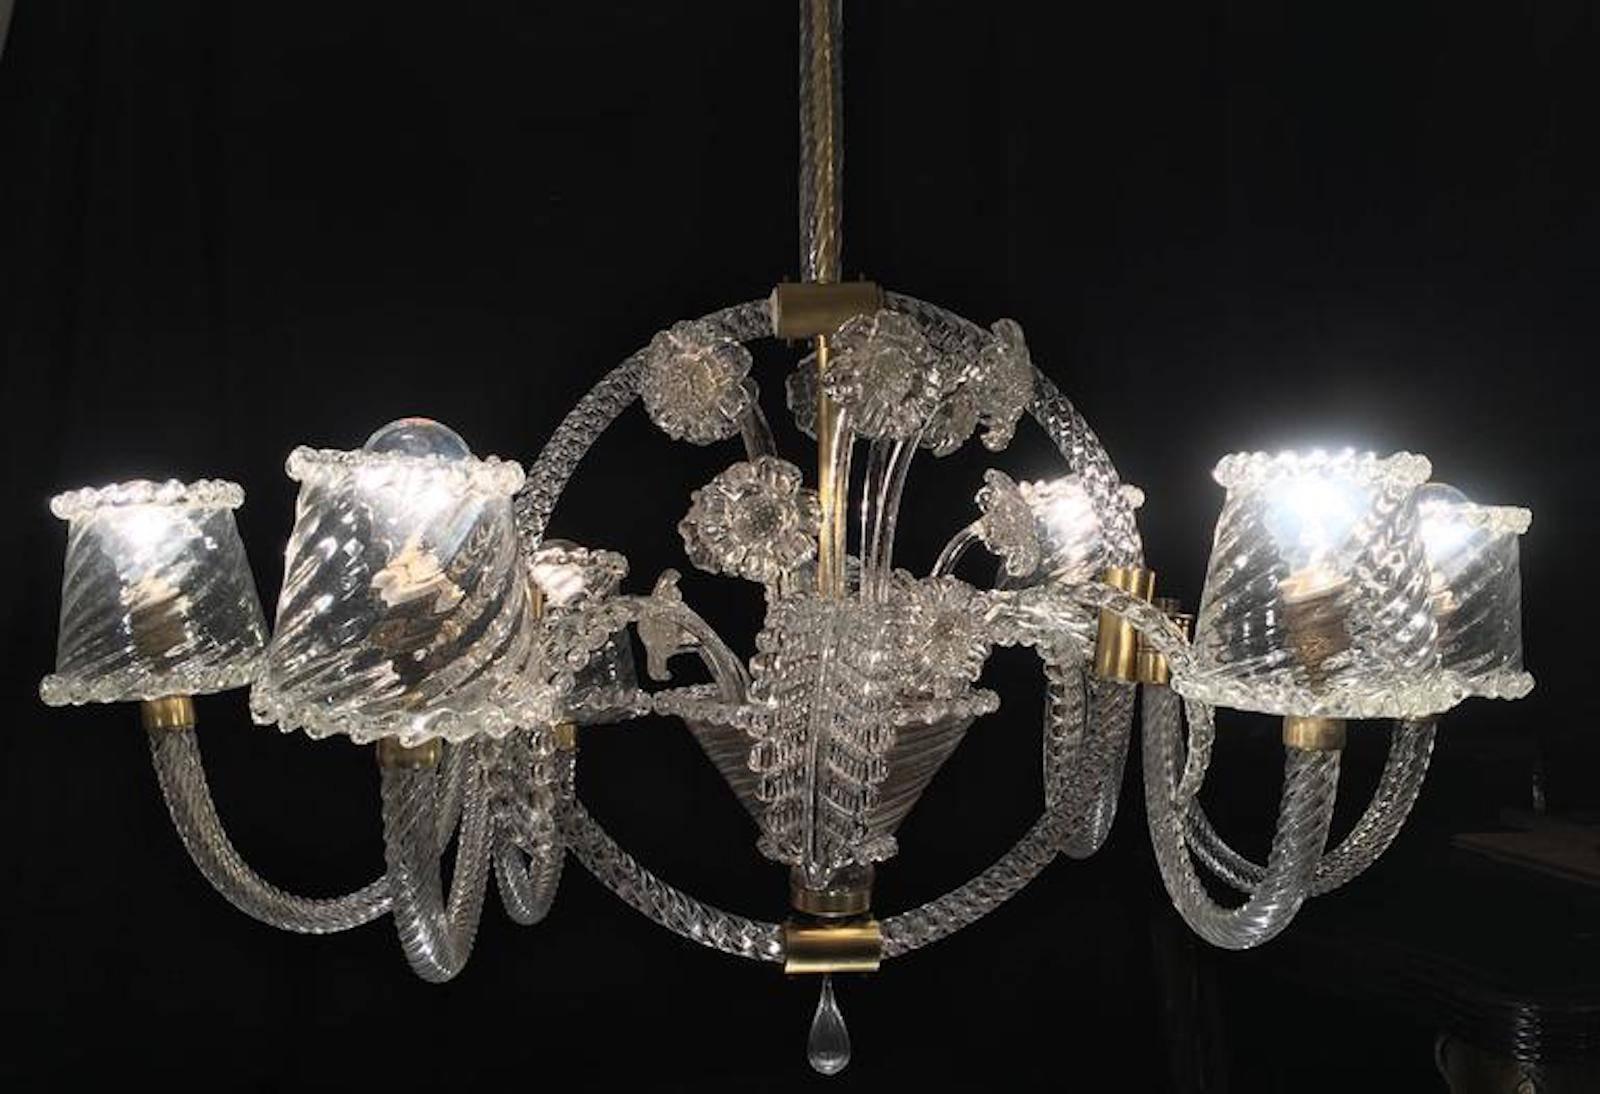 20th Century Majestic Liberty Chandelier by Ercole Barovier, Murano, 1940s For Sale